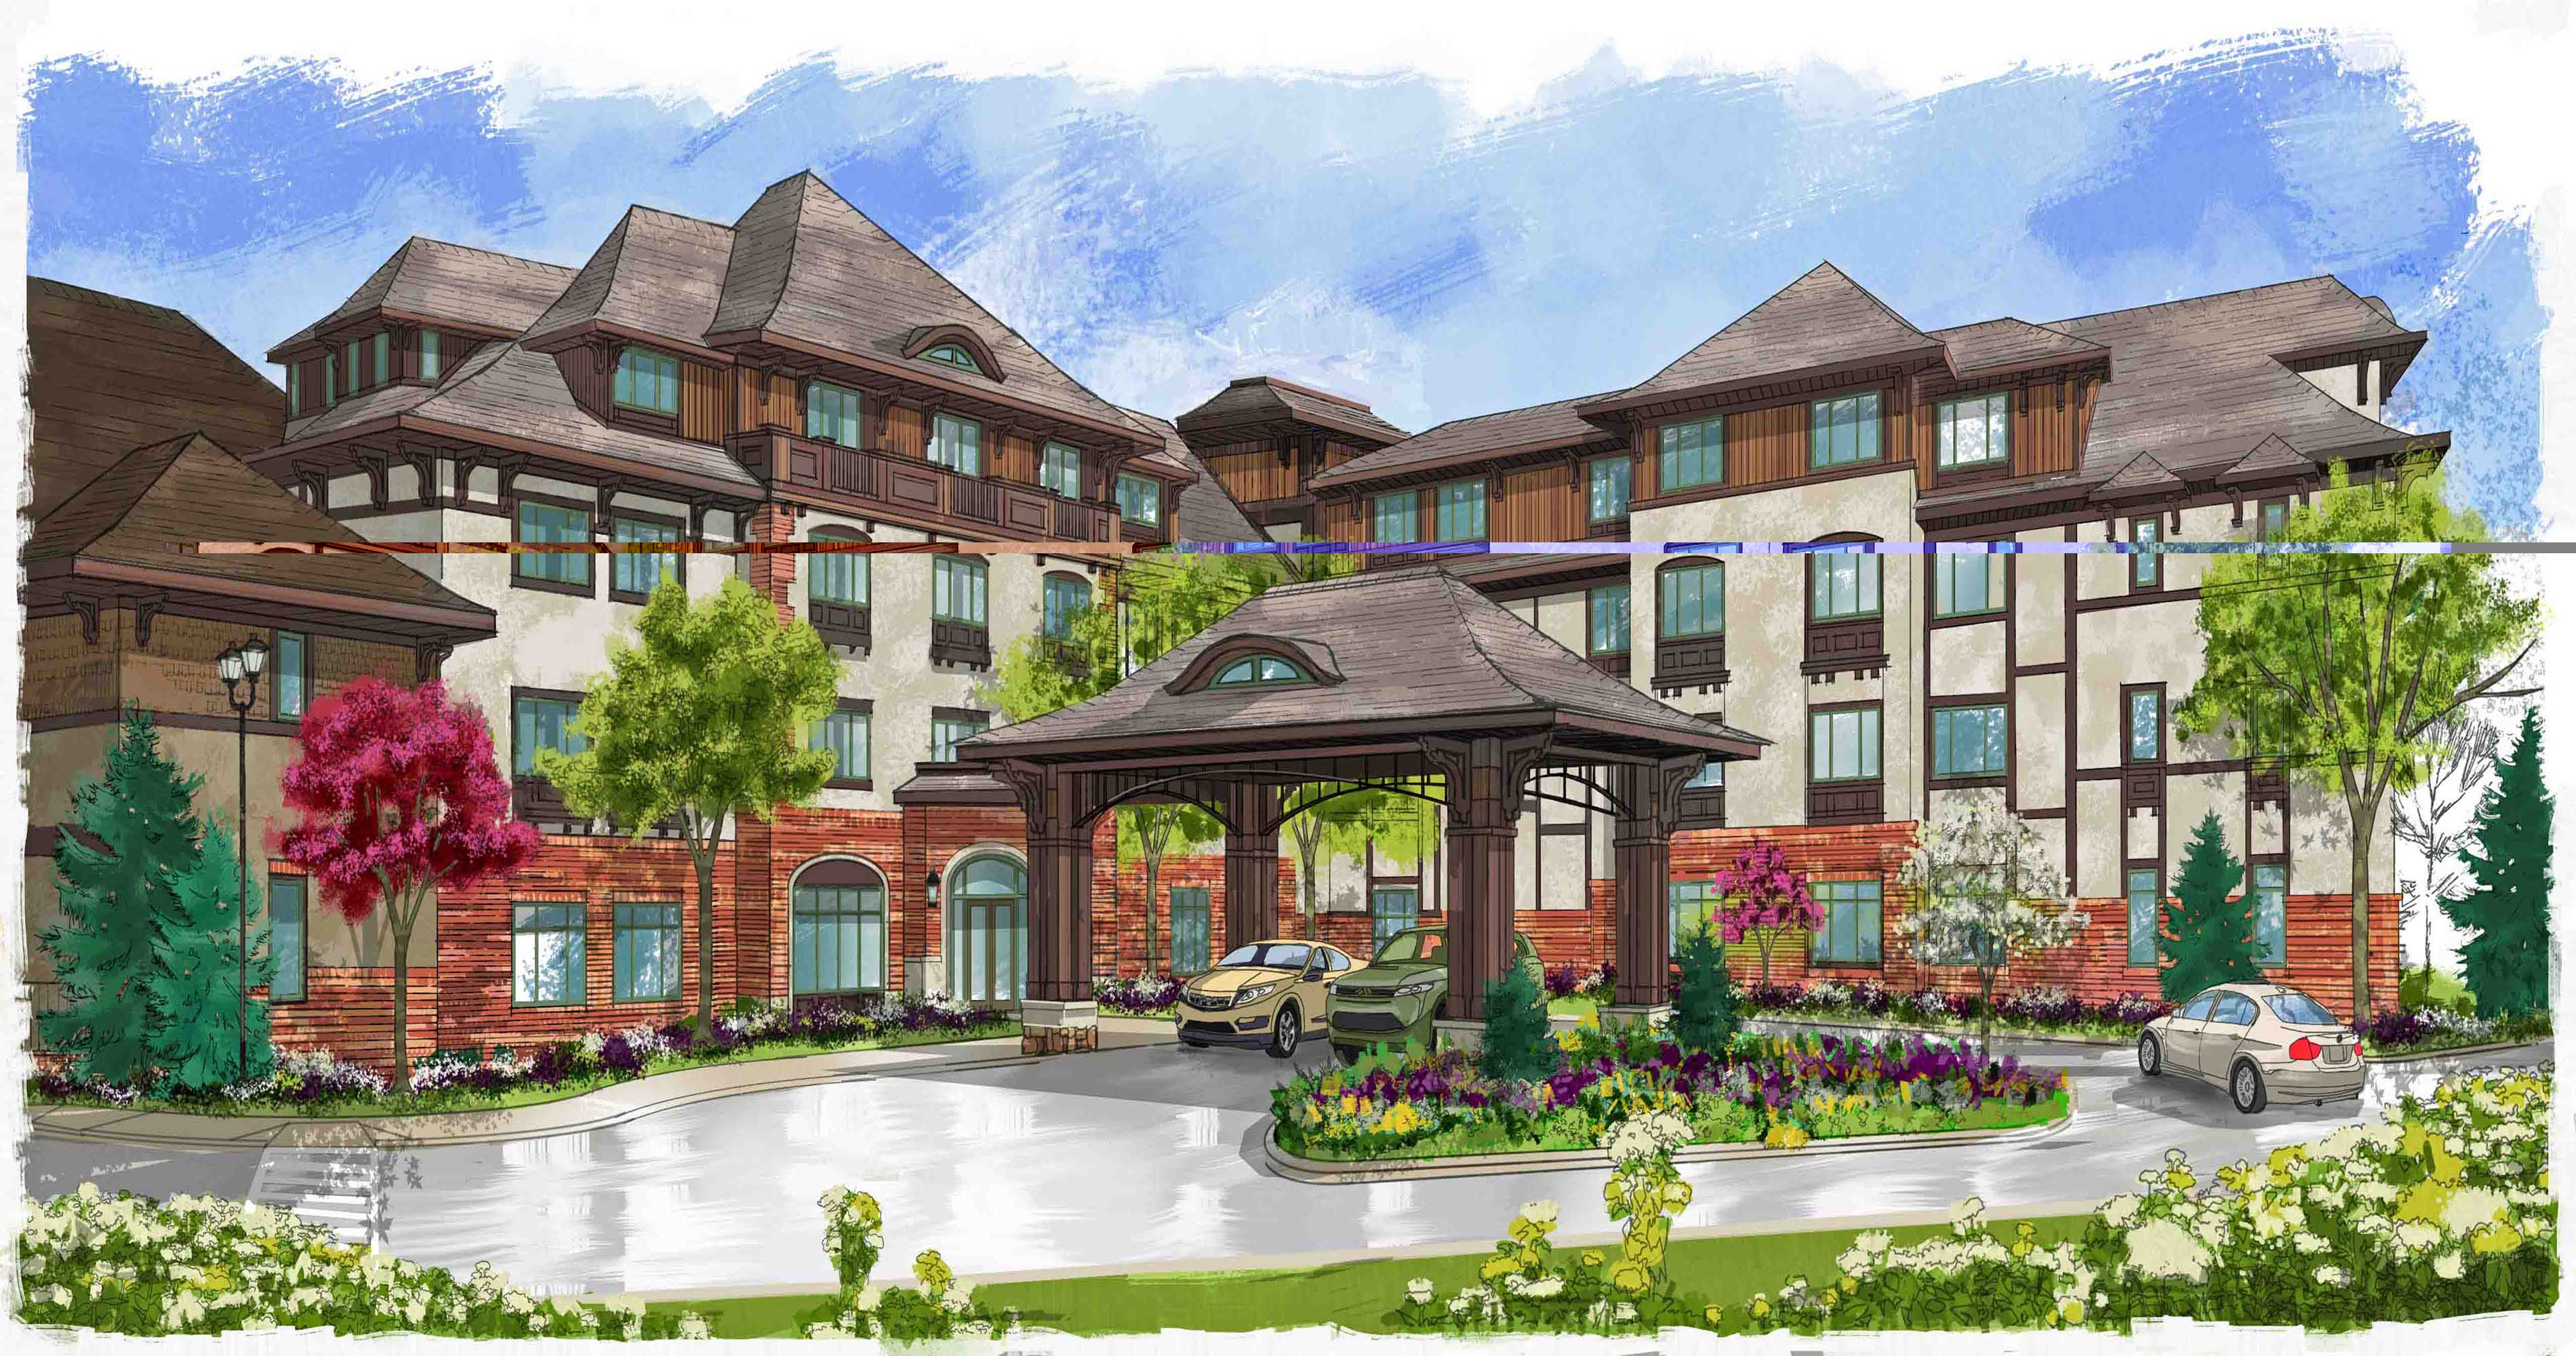 Village Hotel on Biltmore Estate will begin accepting reservations on March 2